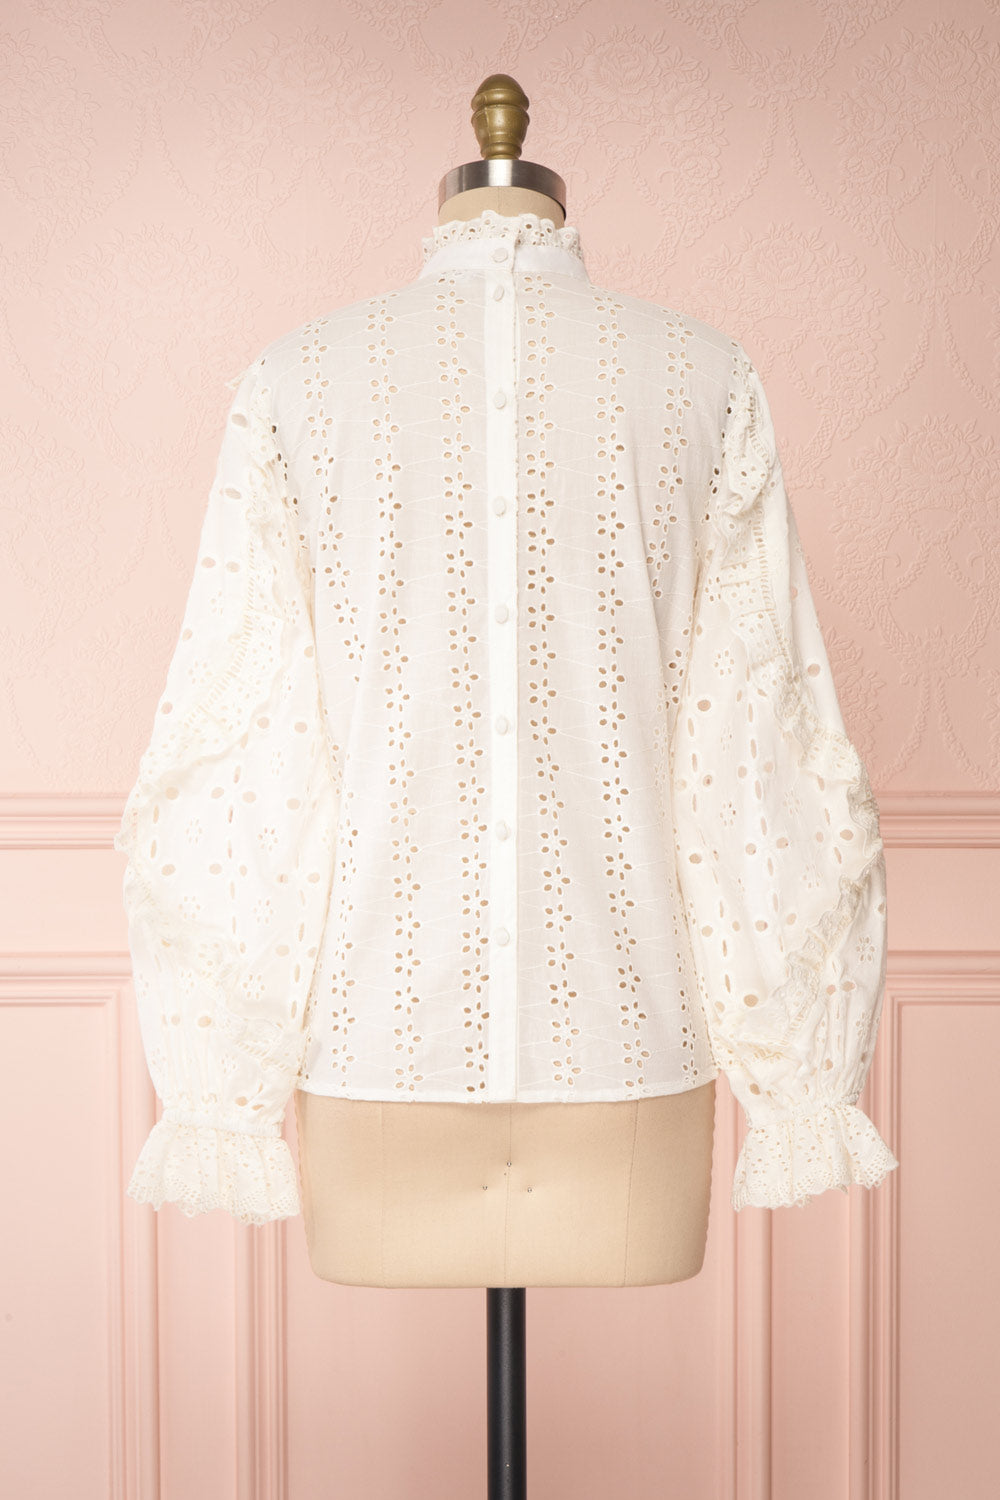 Lunesque Ivory Long Sleeve Openwork Lace Top | Boutique 1861 back view